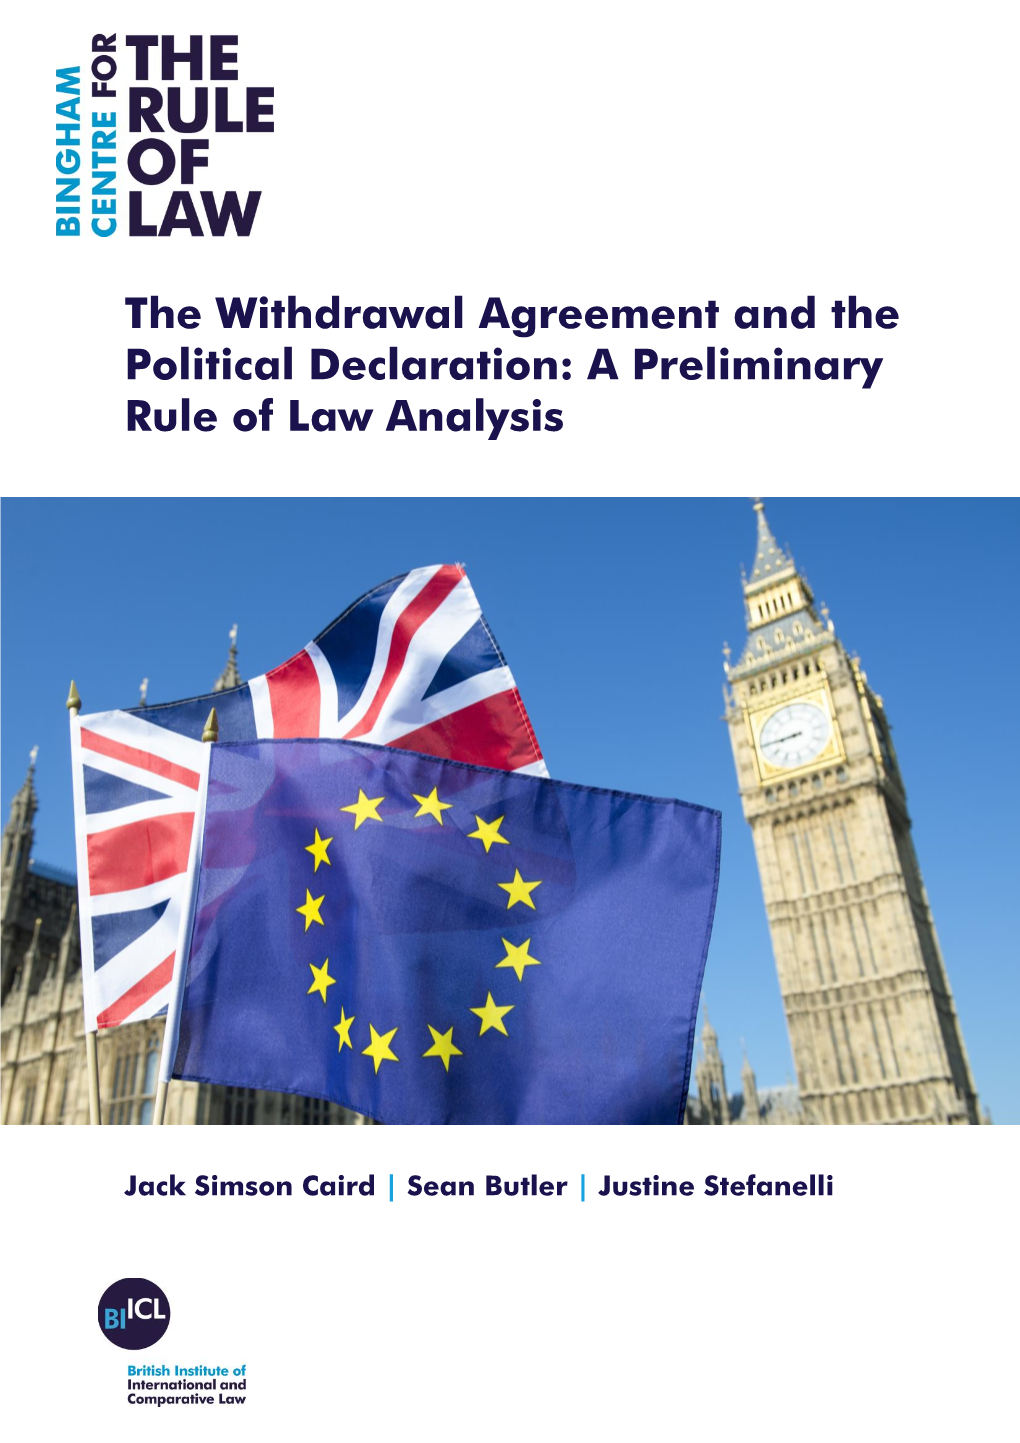 The Withdrawal Agreement and the Political Declaration: a Preliminary Rule of Law Analysis